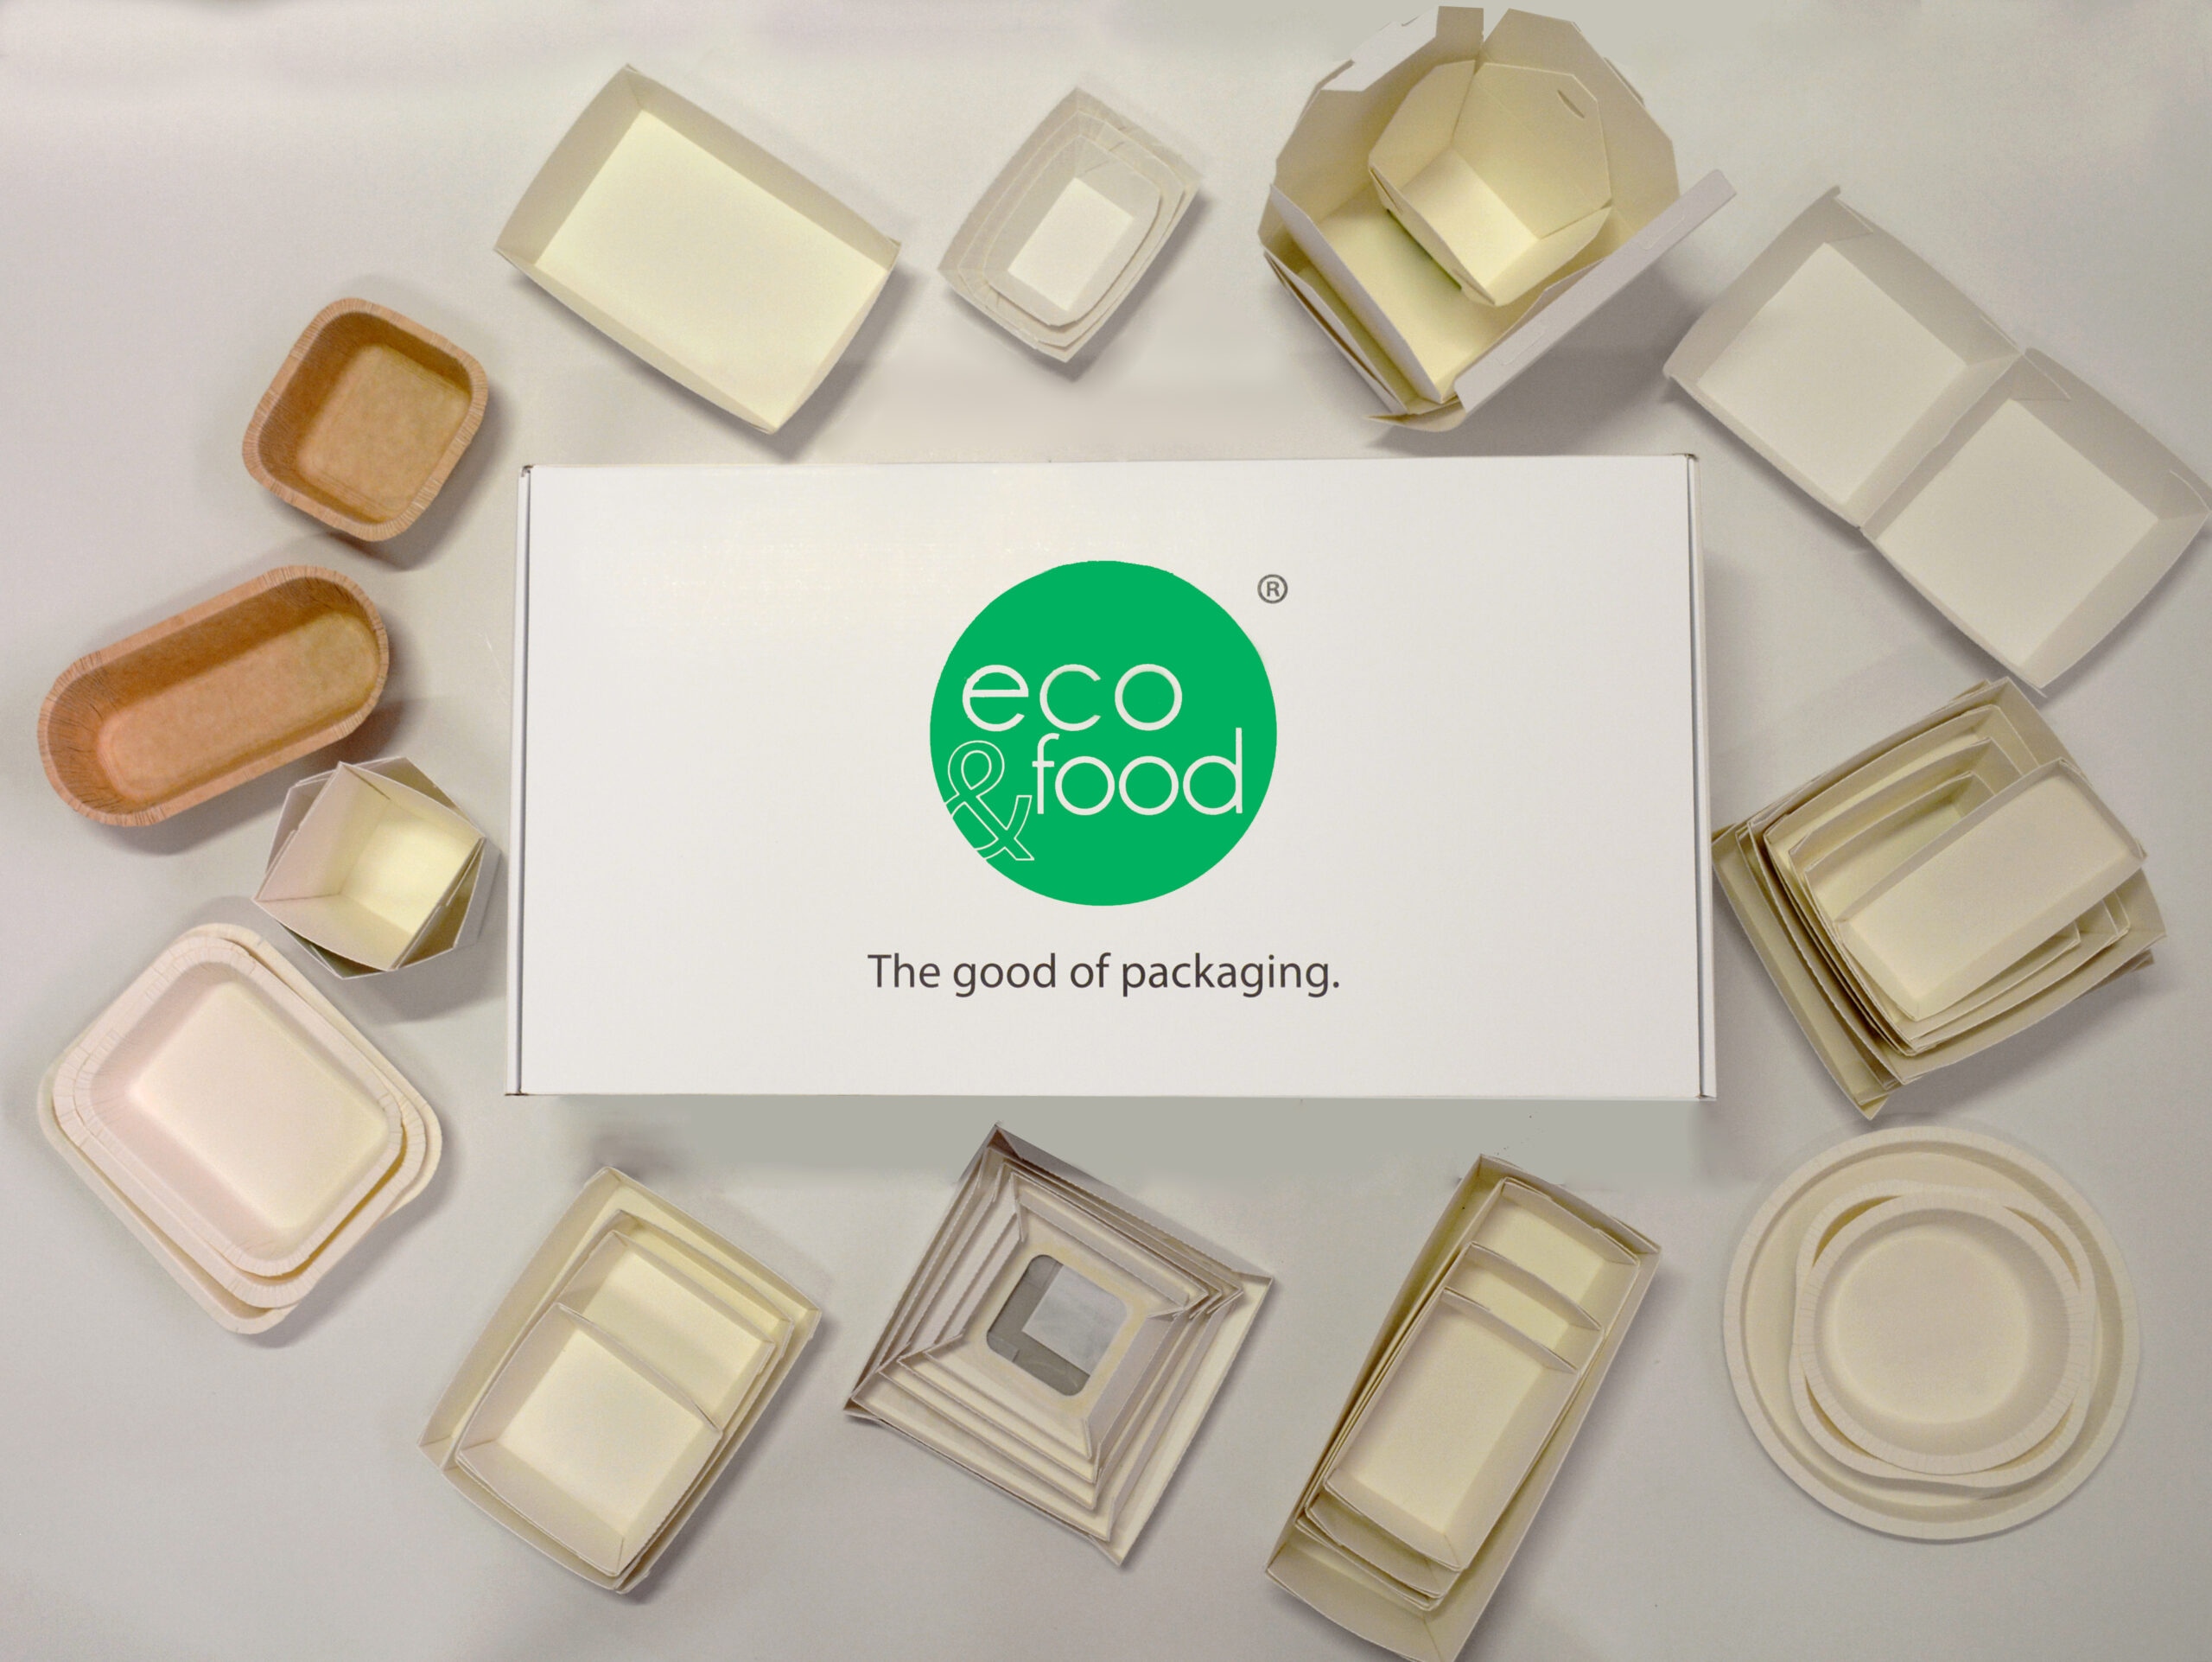 Discover the latest products by Eco&Food